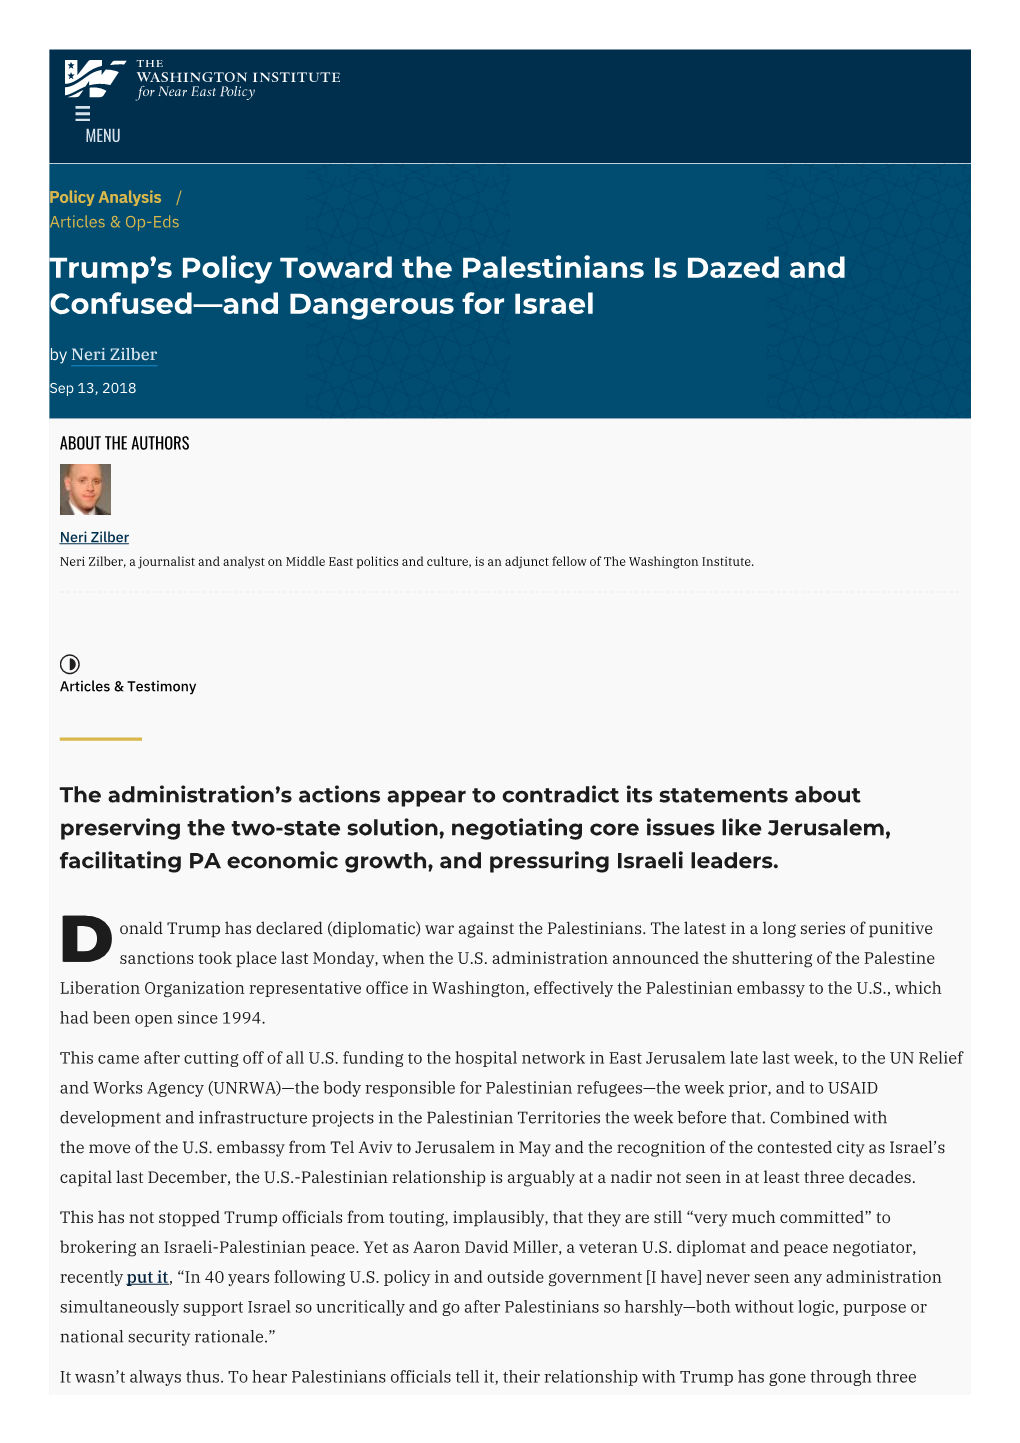 Trump's Policy Toward the Palestinians Is Dazed And